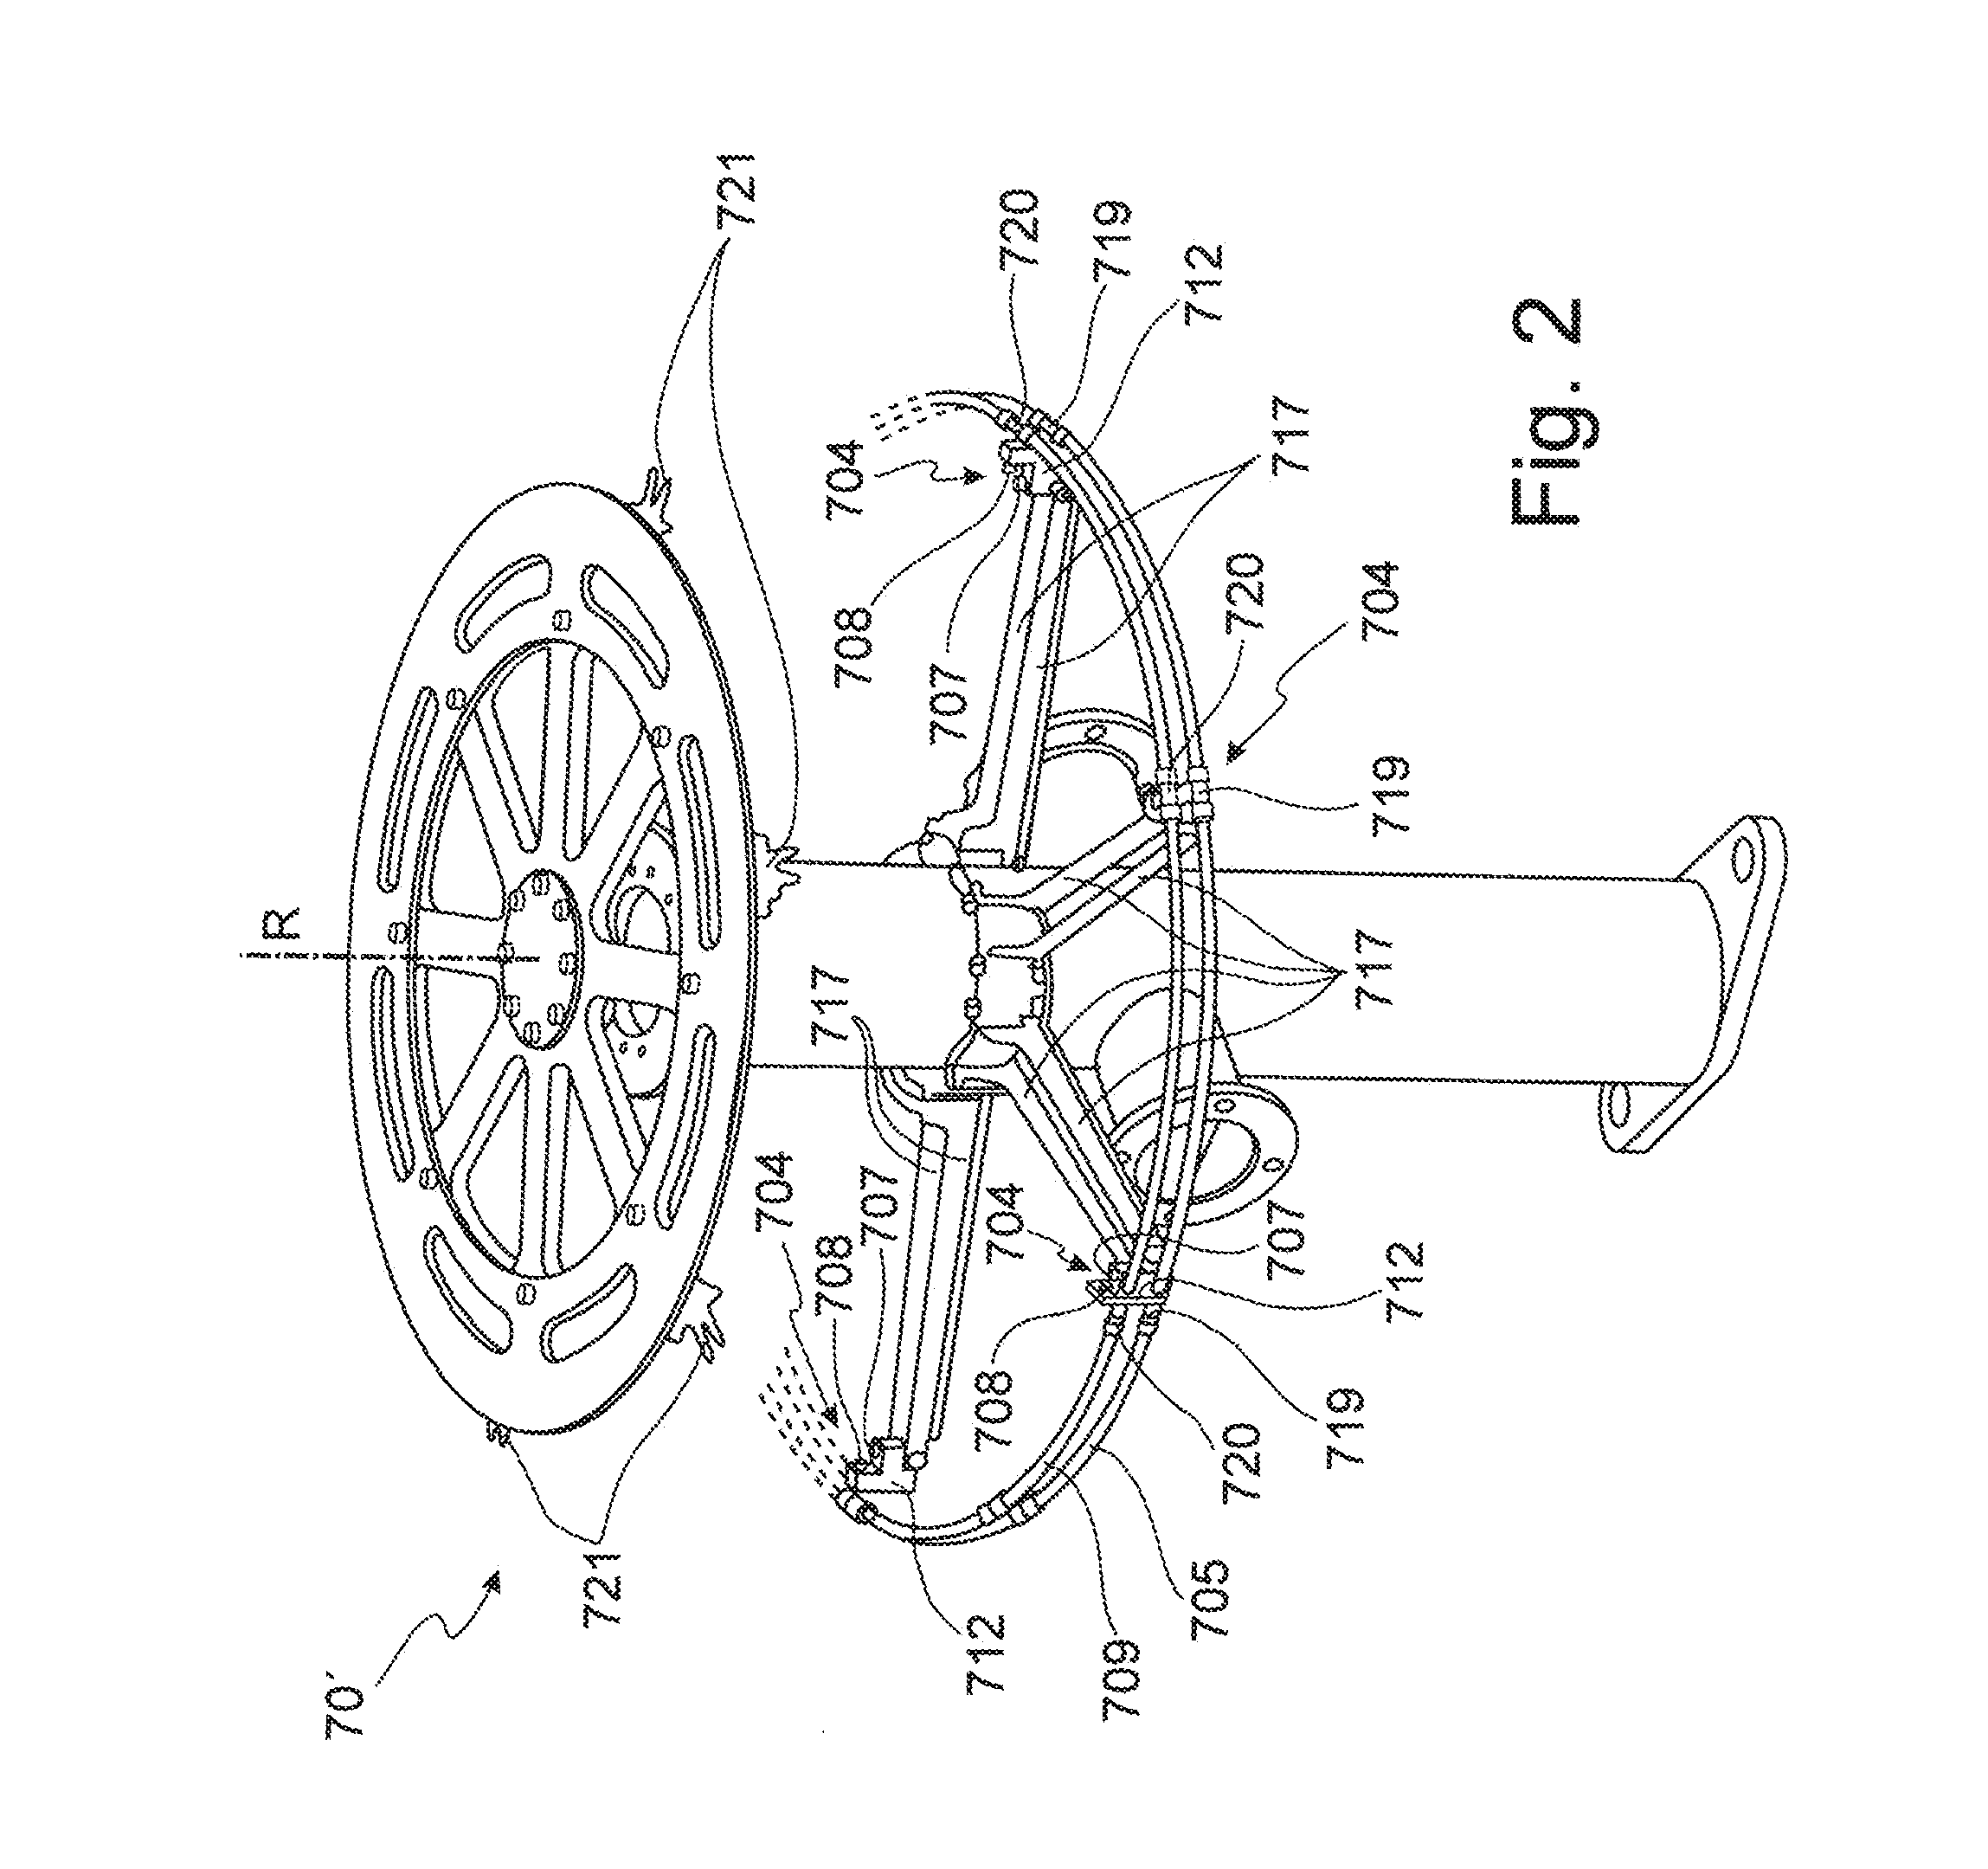 Machine and method for producing and filling containers